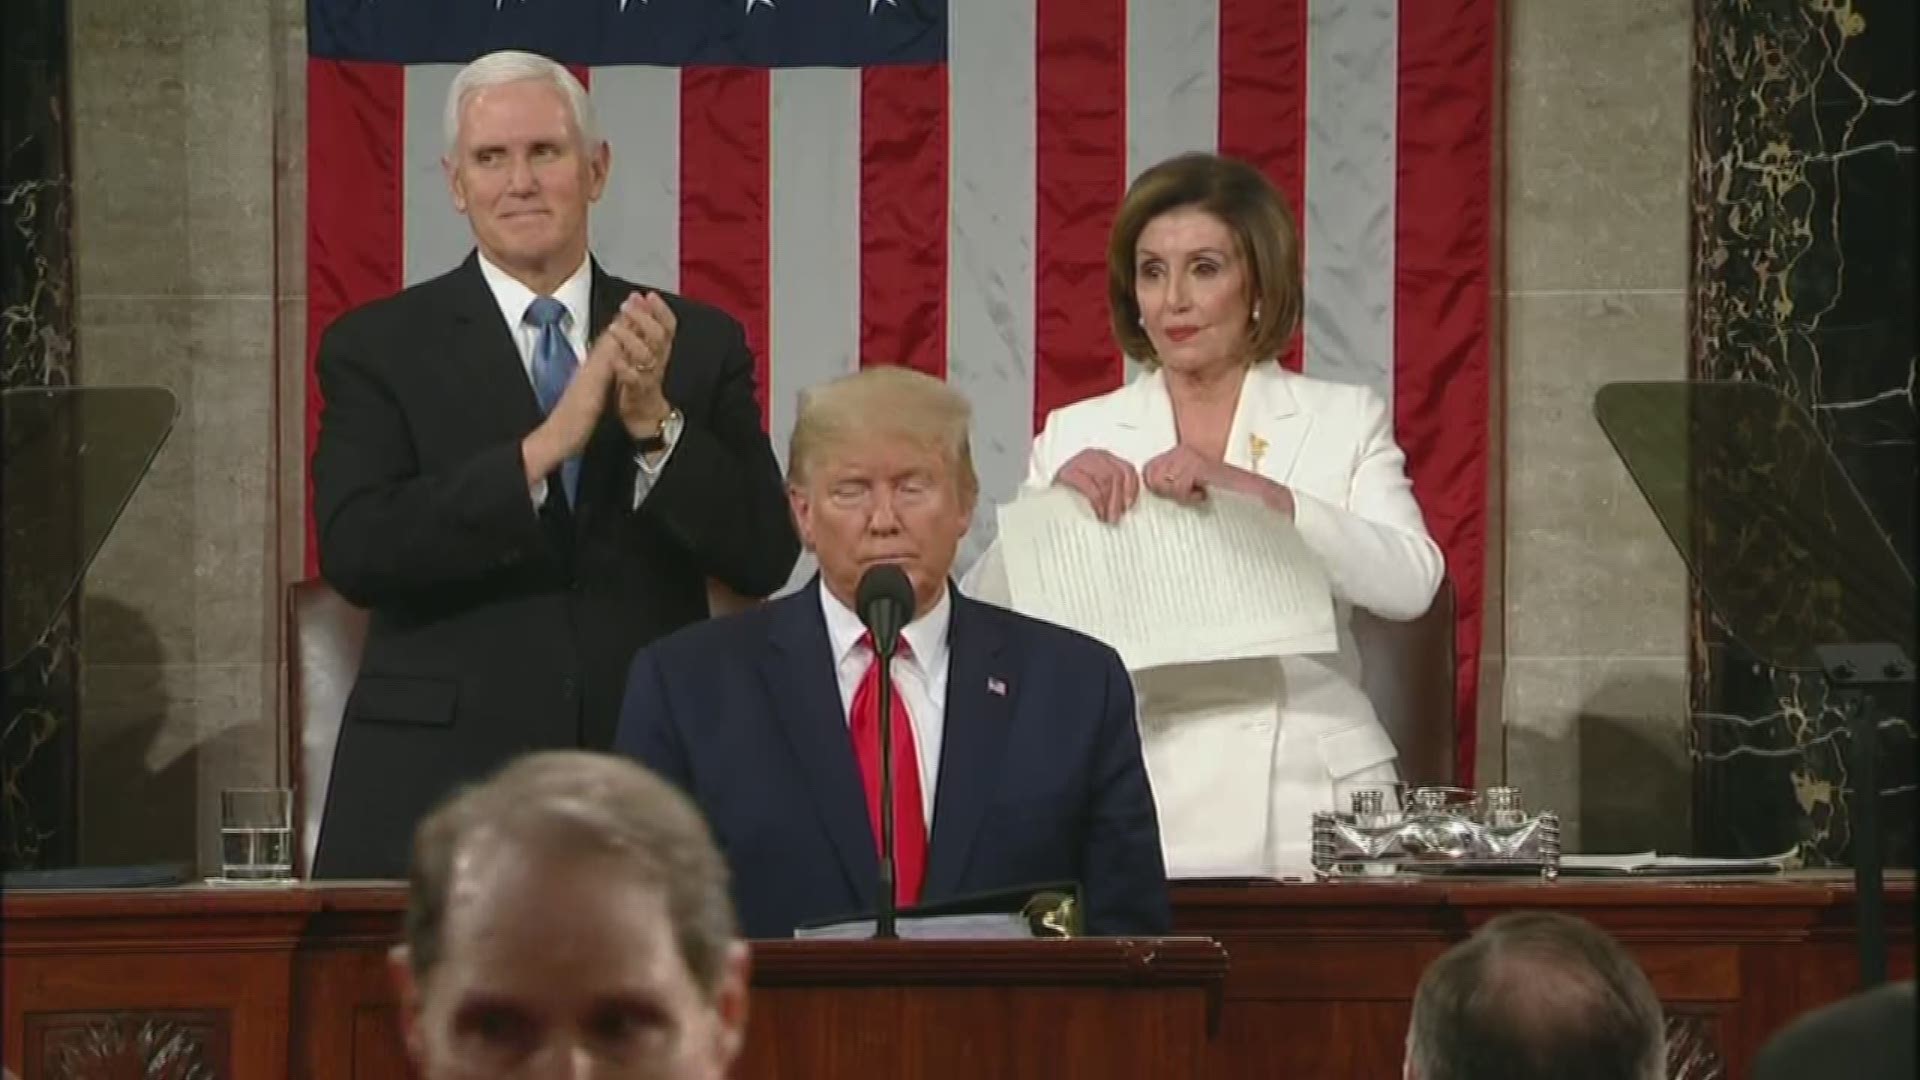 As President Donald Trump wrapped up his State of the Union speech, House Speaker Nancy Pelosi appears to rip up Trump's speech while standing behind him.